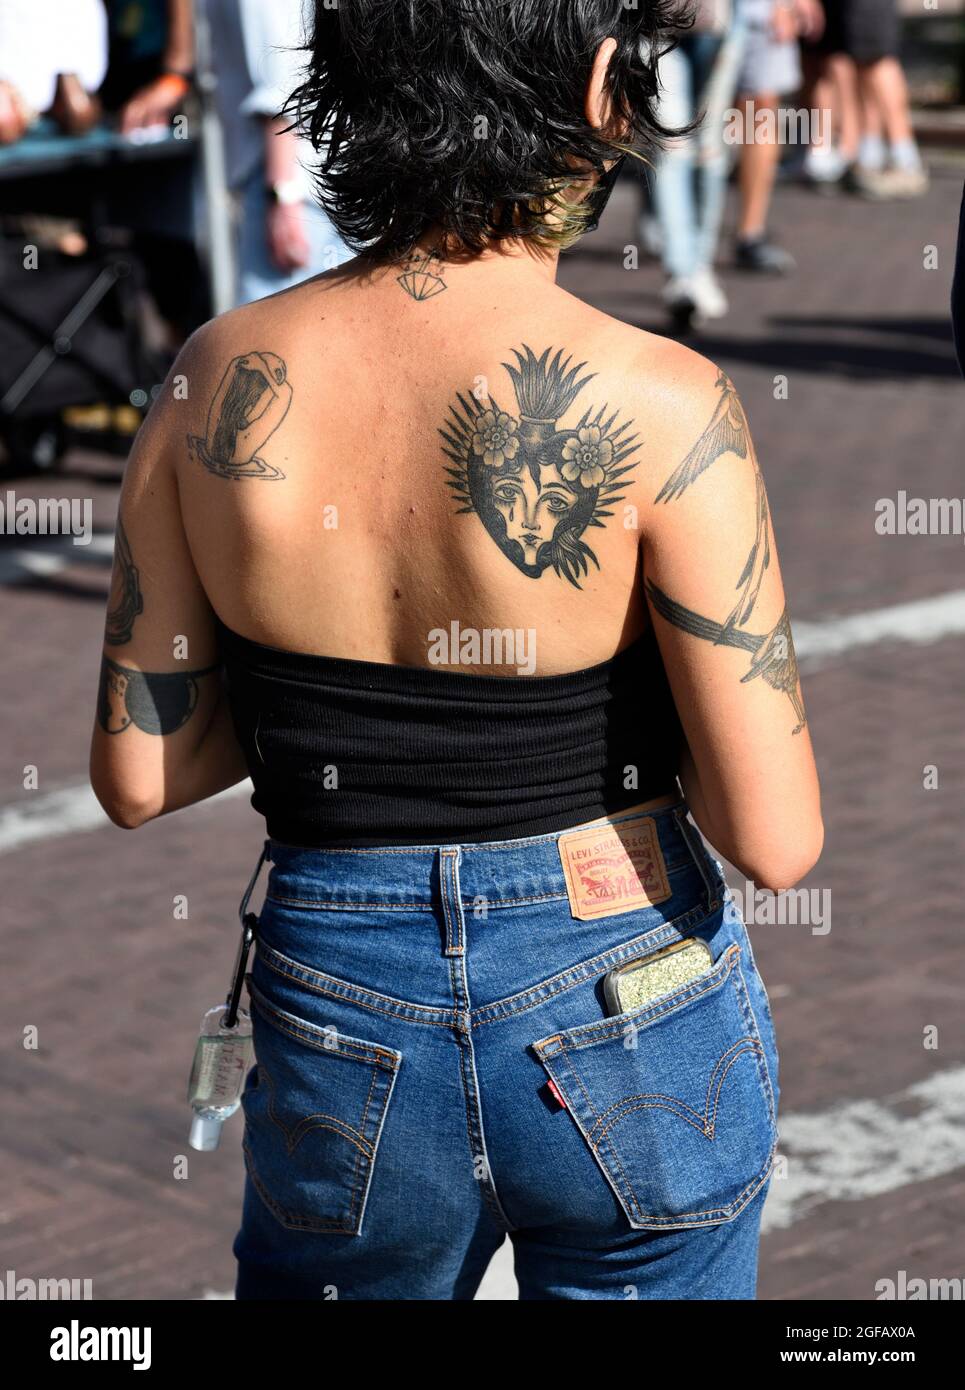 A young woman with a Sacred Heart tattoo on her back visits an outdoor art show in Santa Fe, New Mexico. Stock Photo